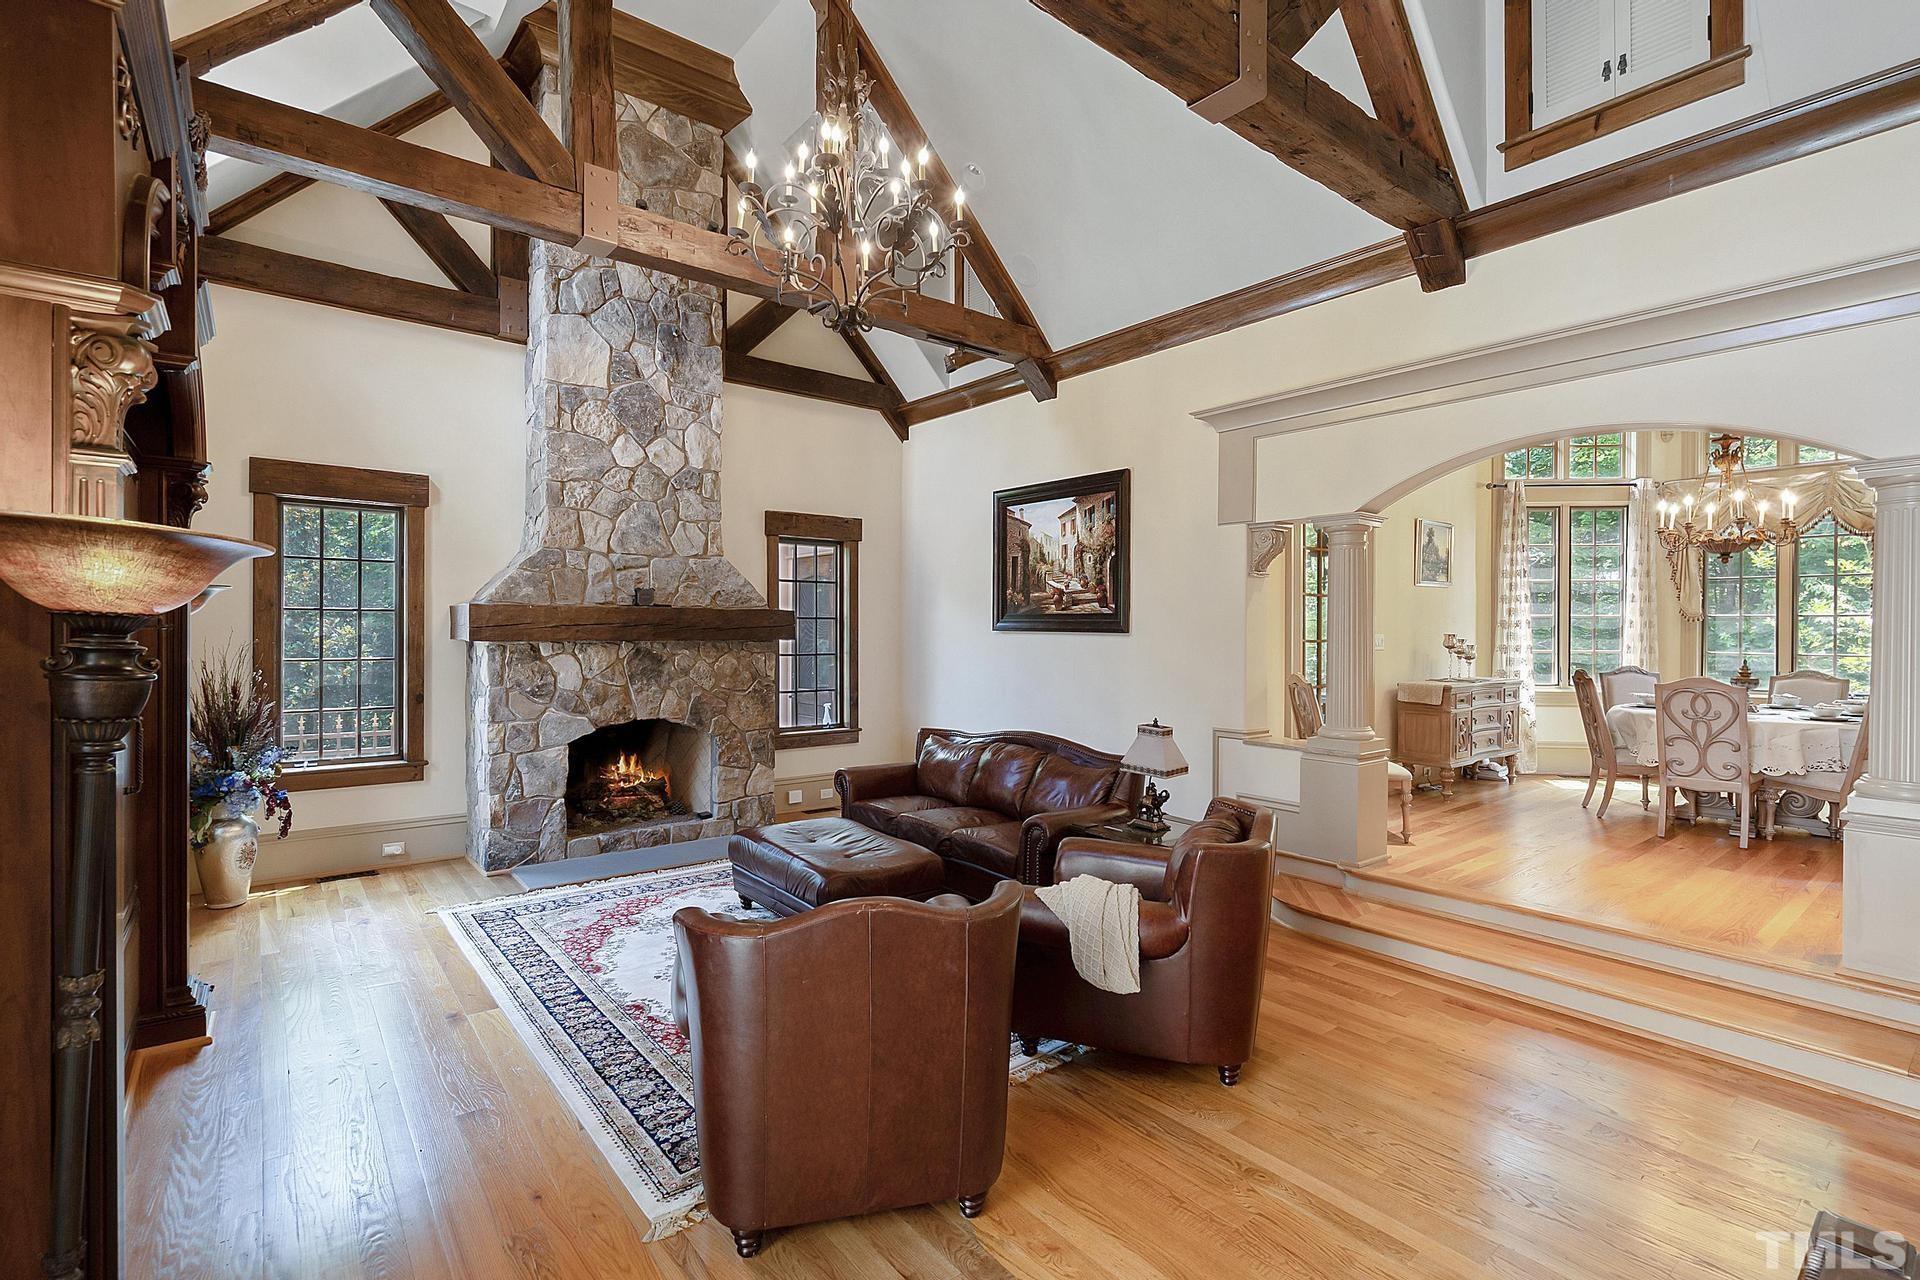 Exposed  wooden hammerbeam and the stone fireplace  exude comfort. Entry to the back patio and pool.